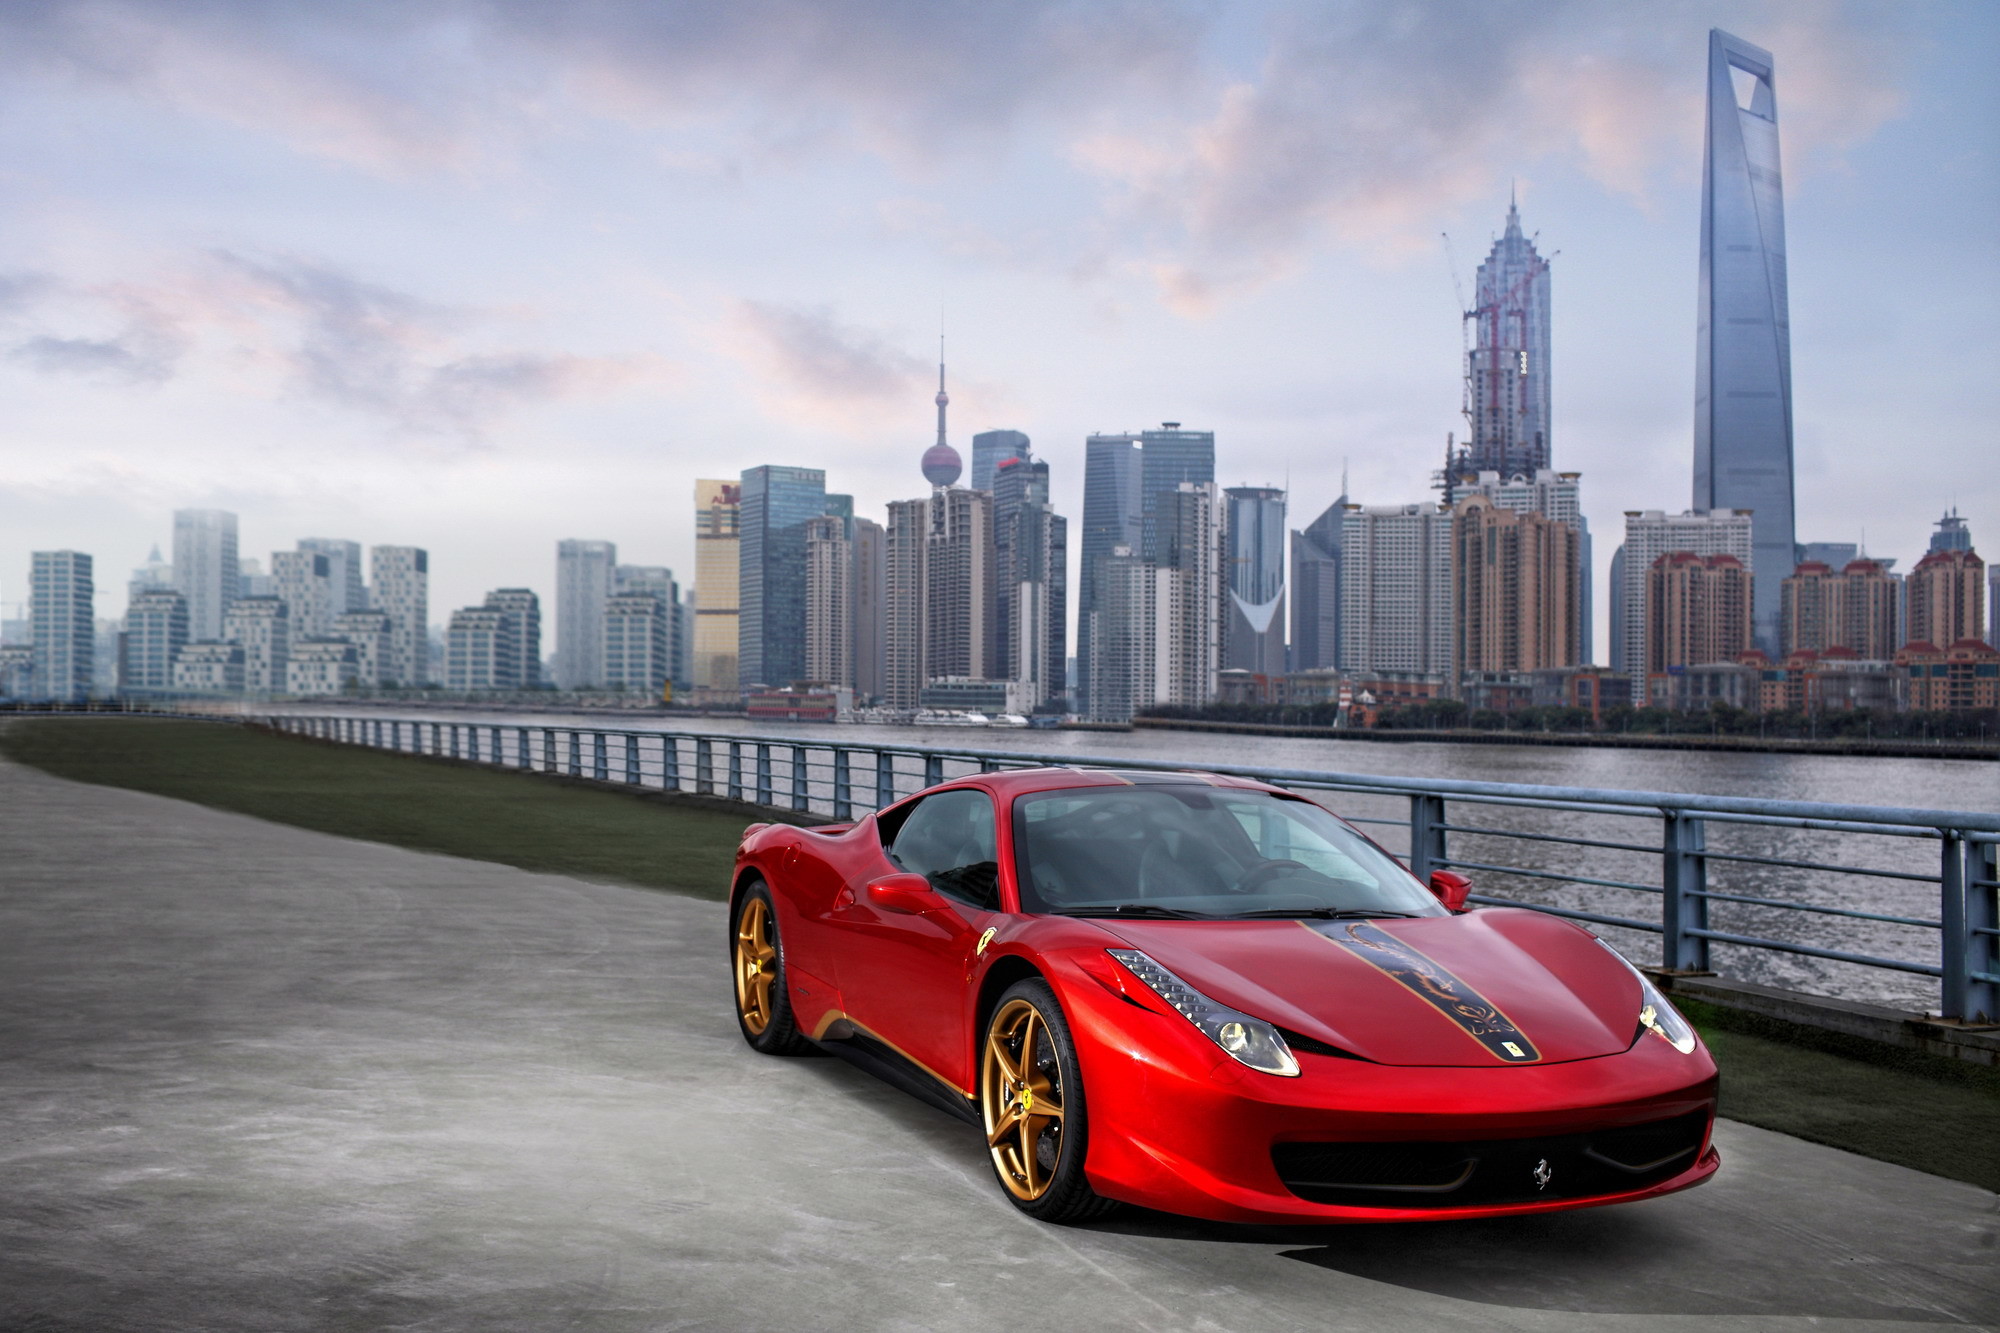 2000x1333 2012 Ferrari 458 Italia China Special Edition Pictures, Photos, Wallpapers.